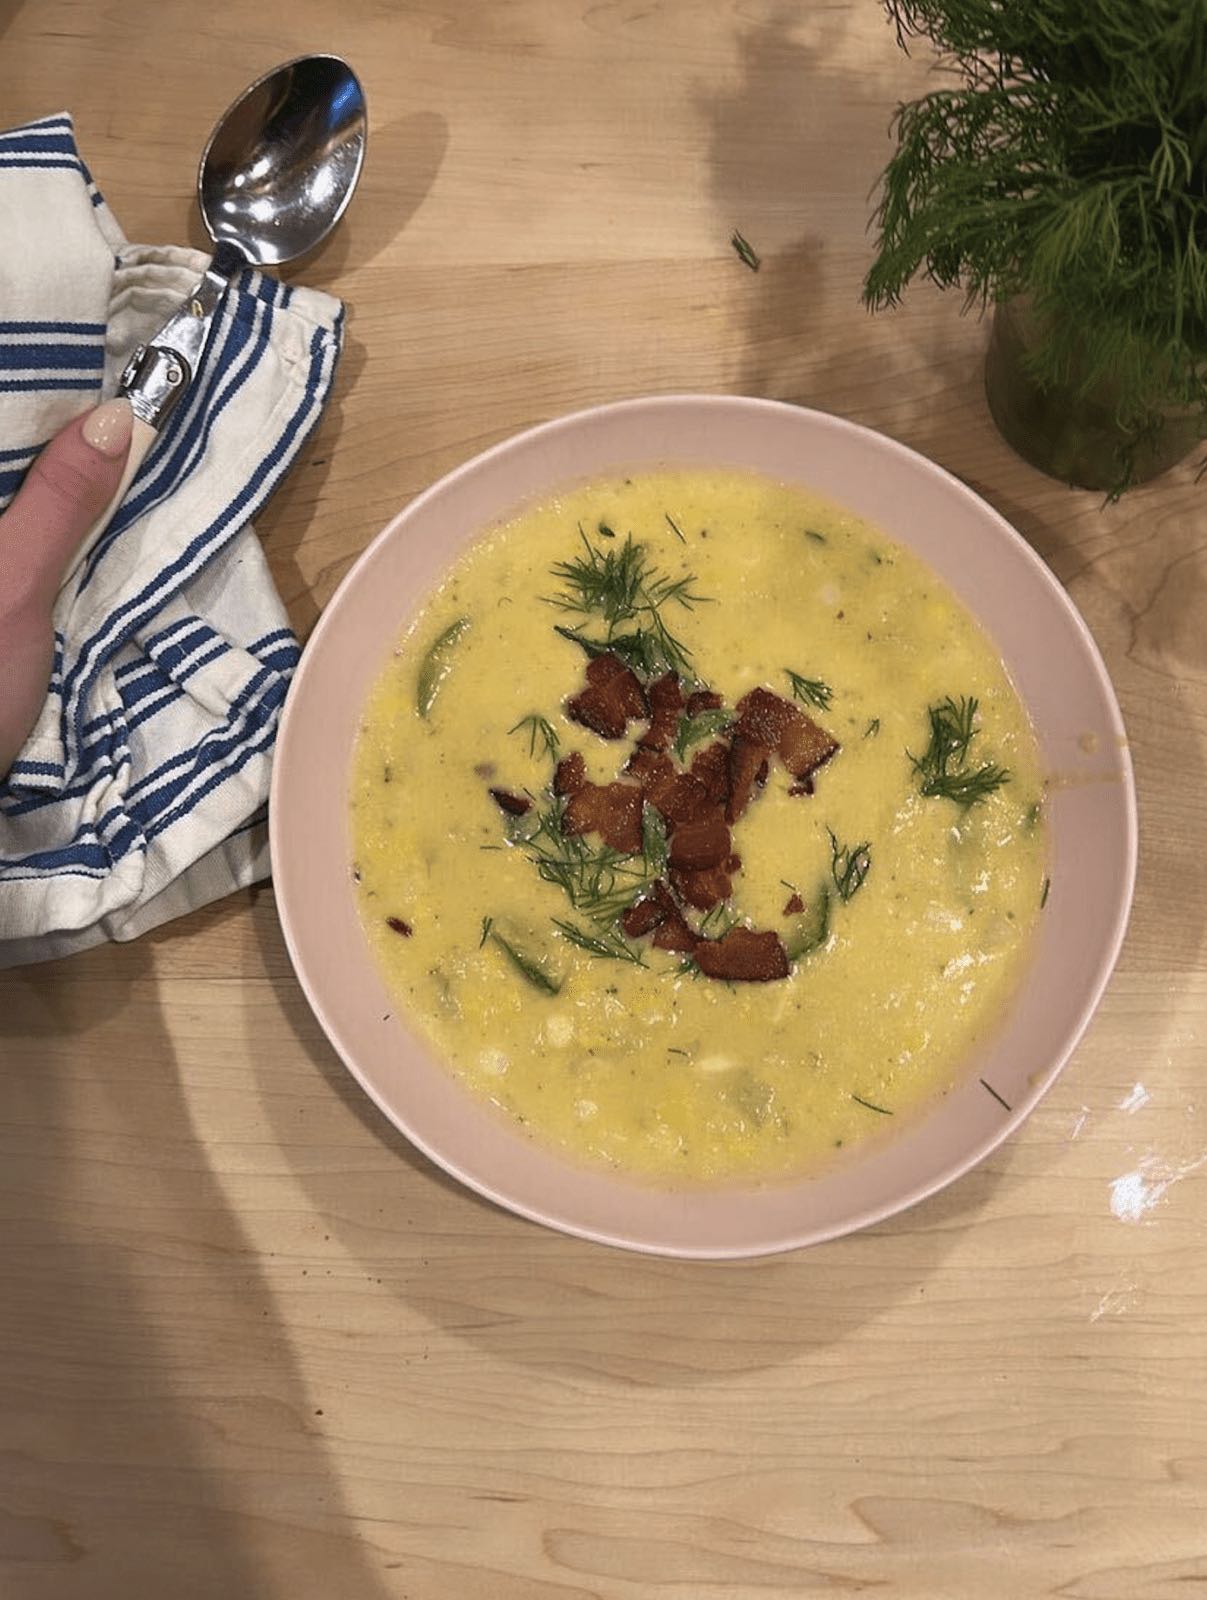 This Creamy Corn Chowder Recipe Is Perfect for the End of Summer | Wit & Delight